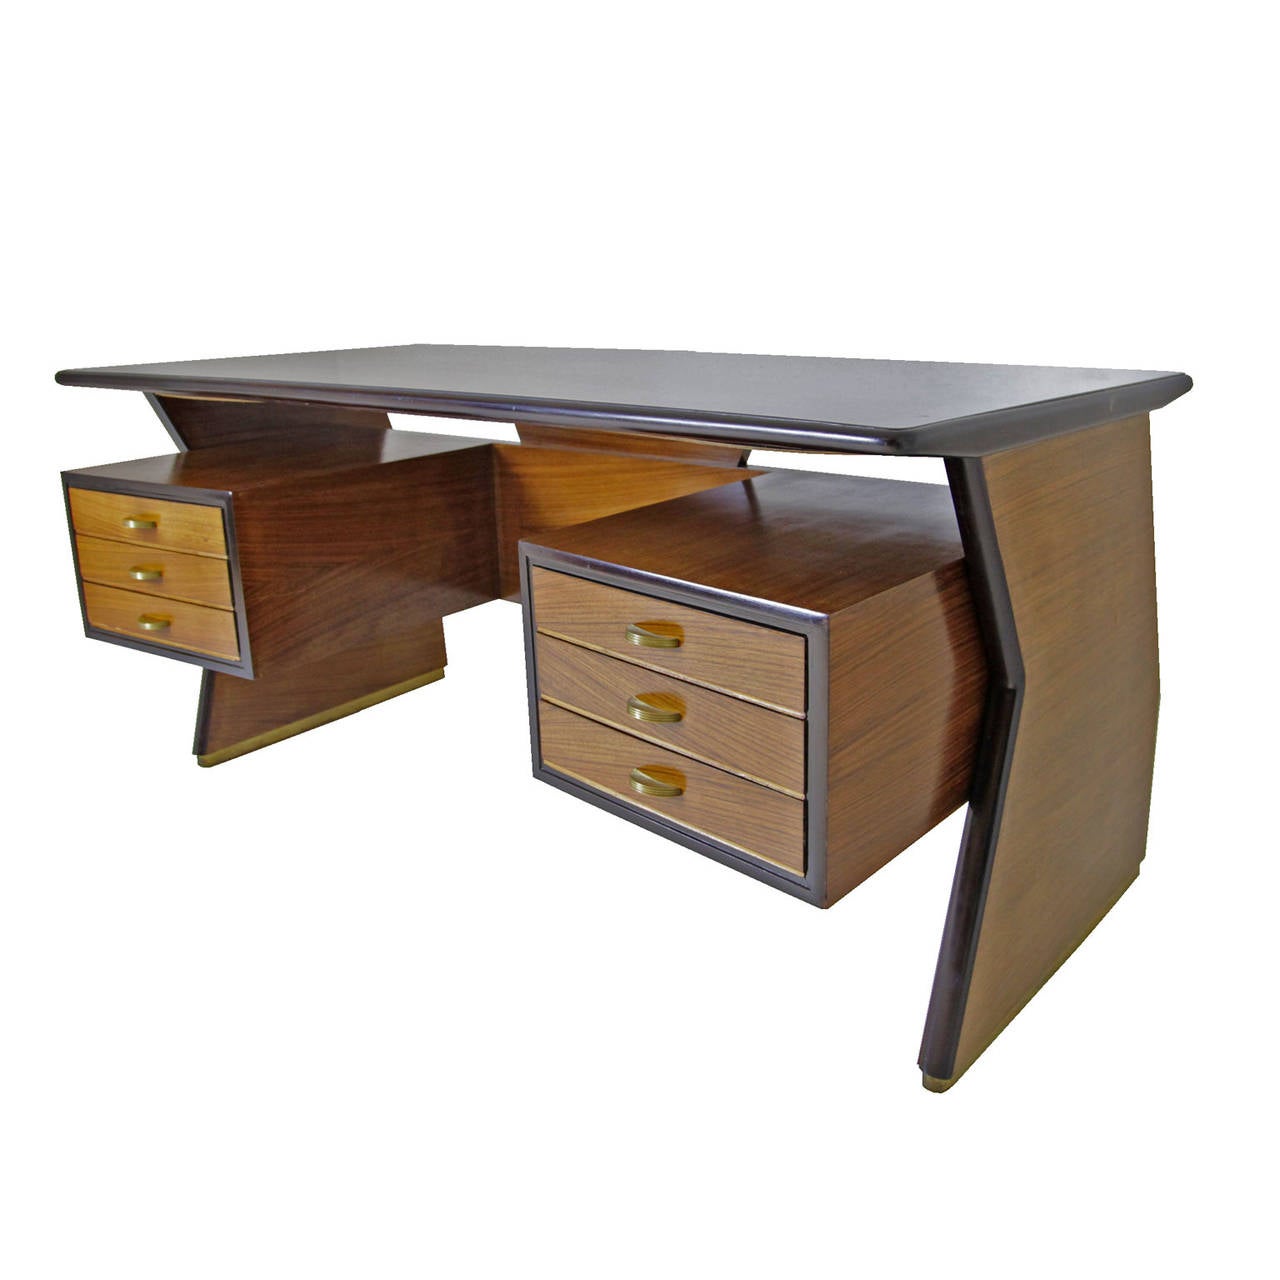 Wonderful Italian desk, dating from the 1940s.
With black glass top.